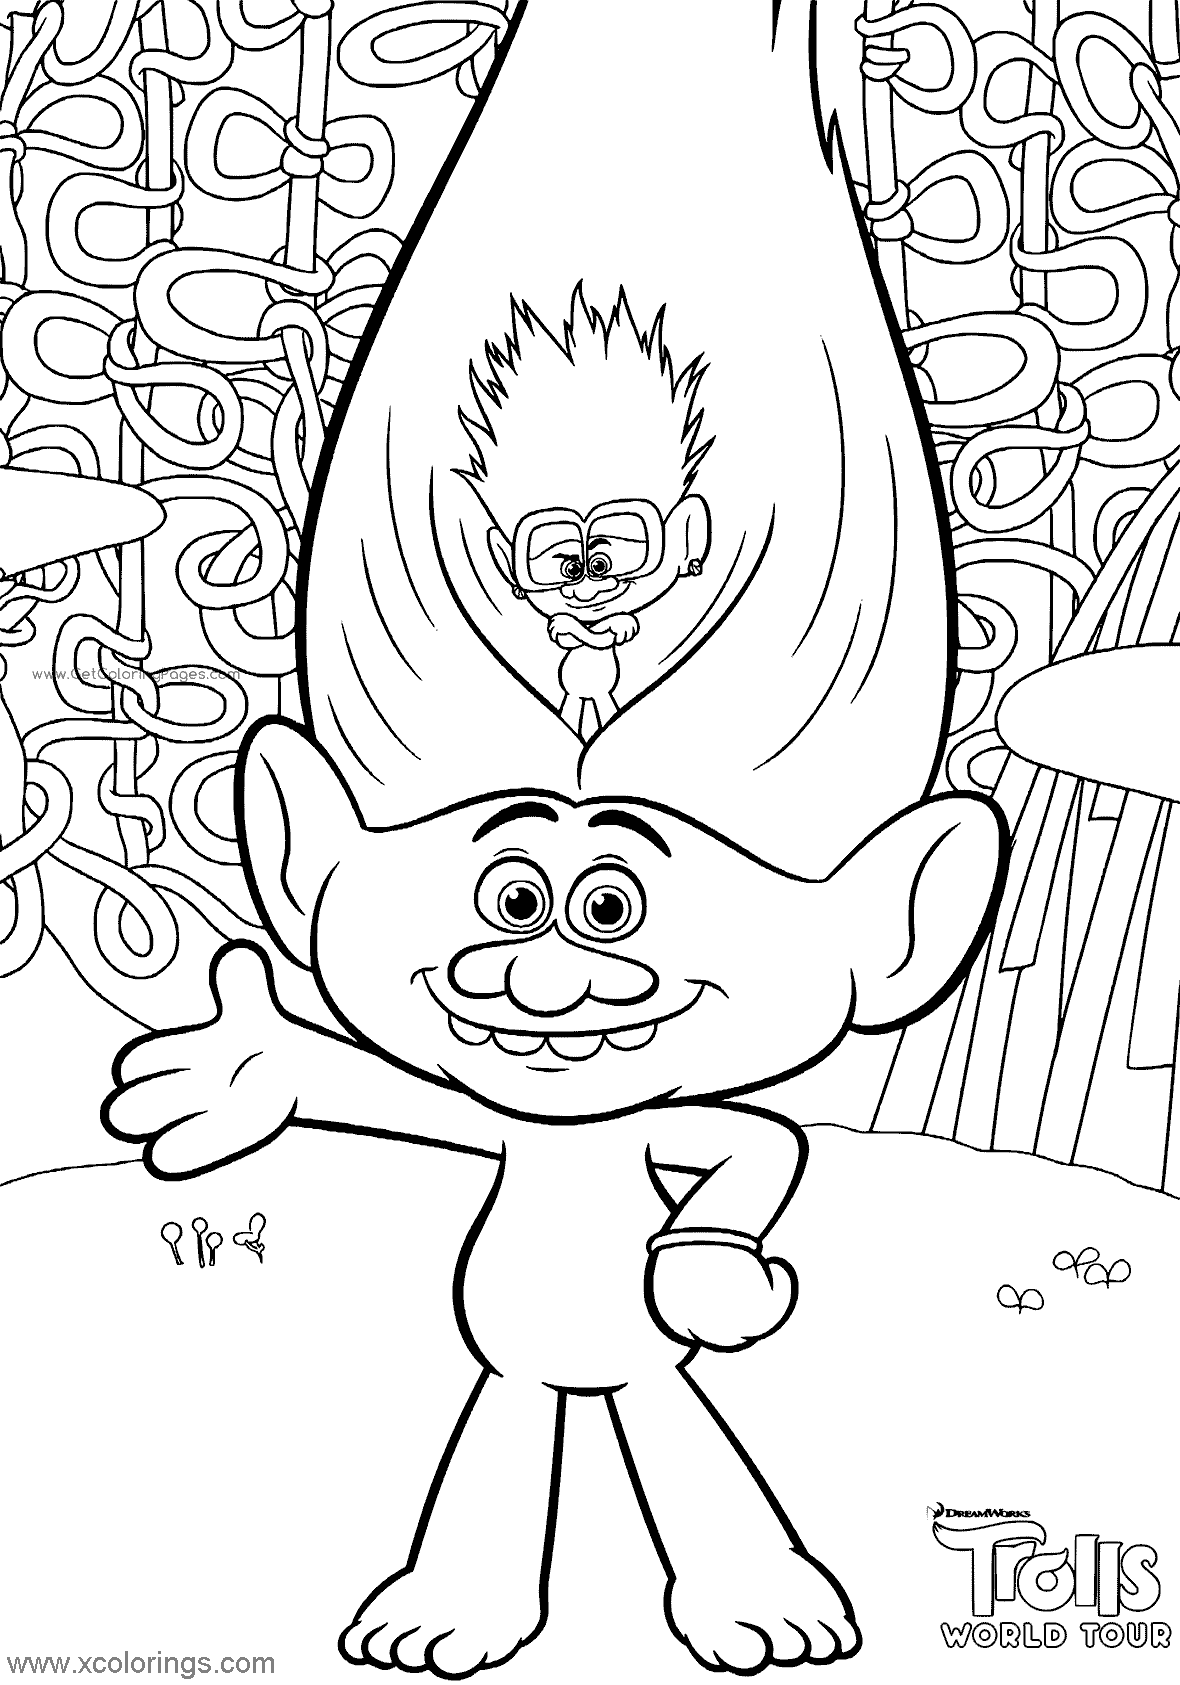 Free Trolls World Tour Coloring Pages Branch printable